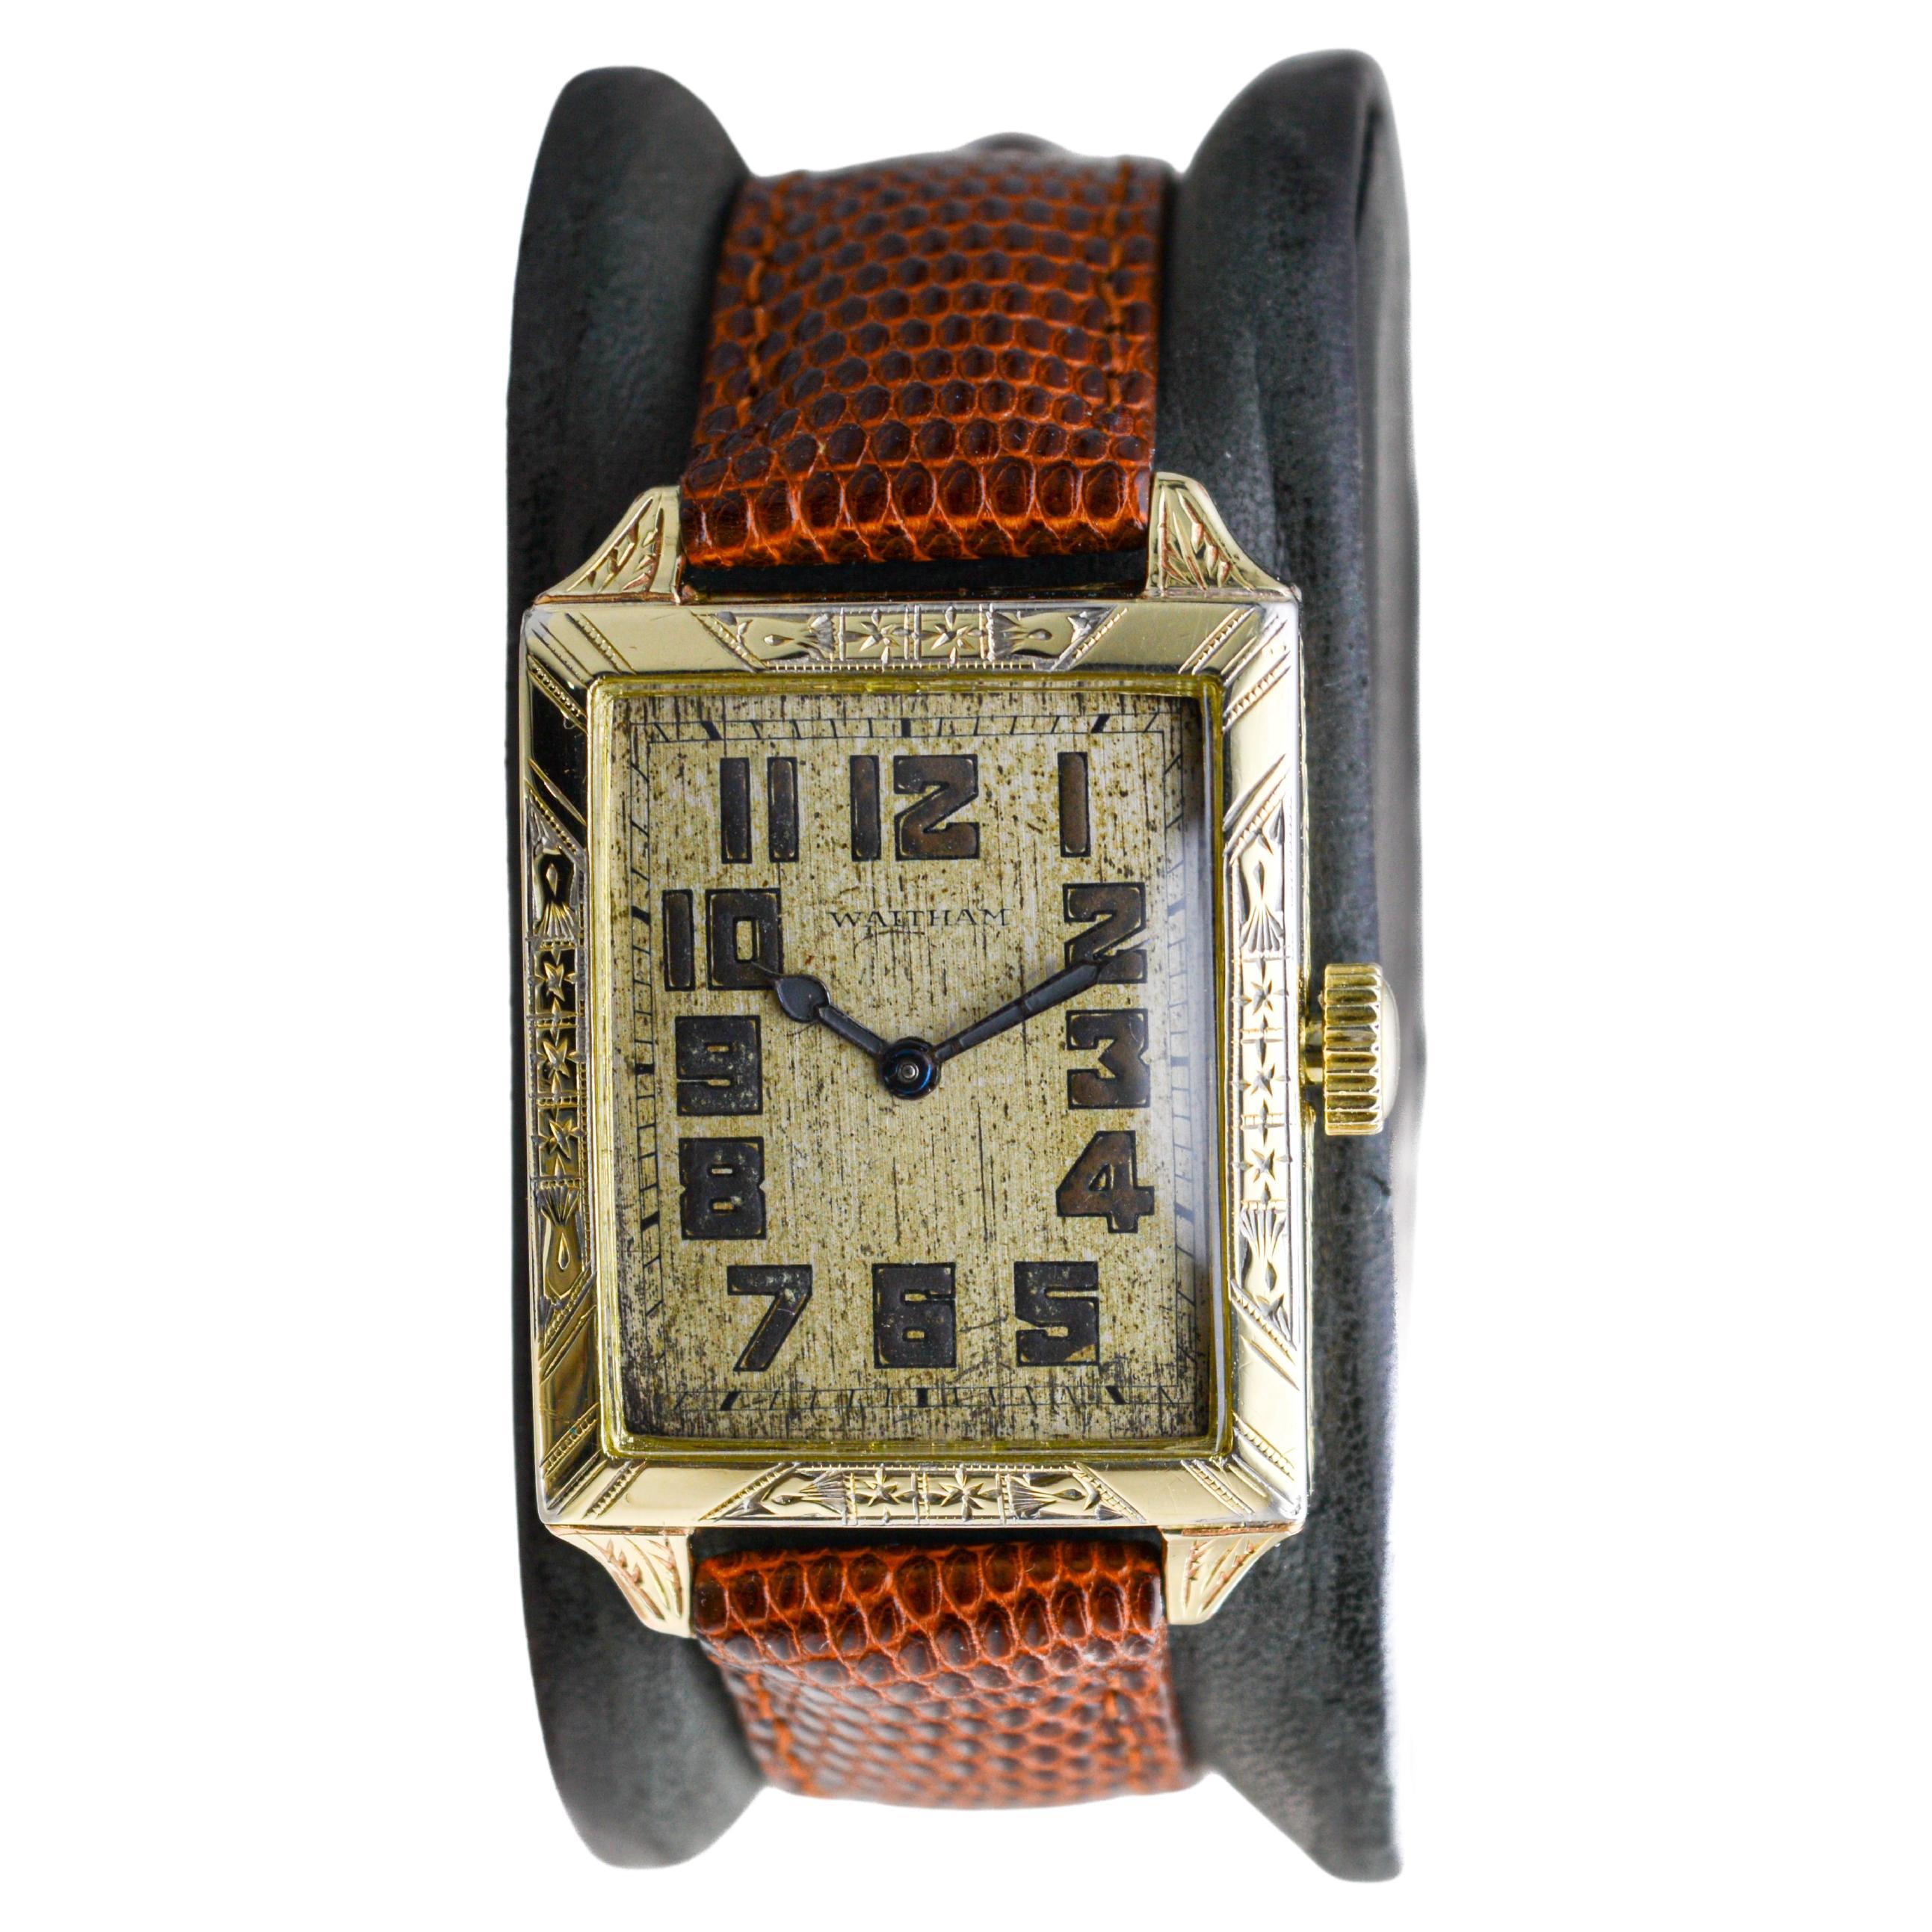 Waltham Yellow Gold Filled Art Deco Watch with Original Dial from 1926 For Sale 8